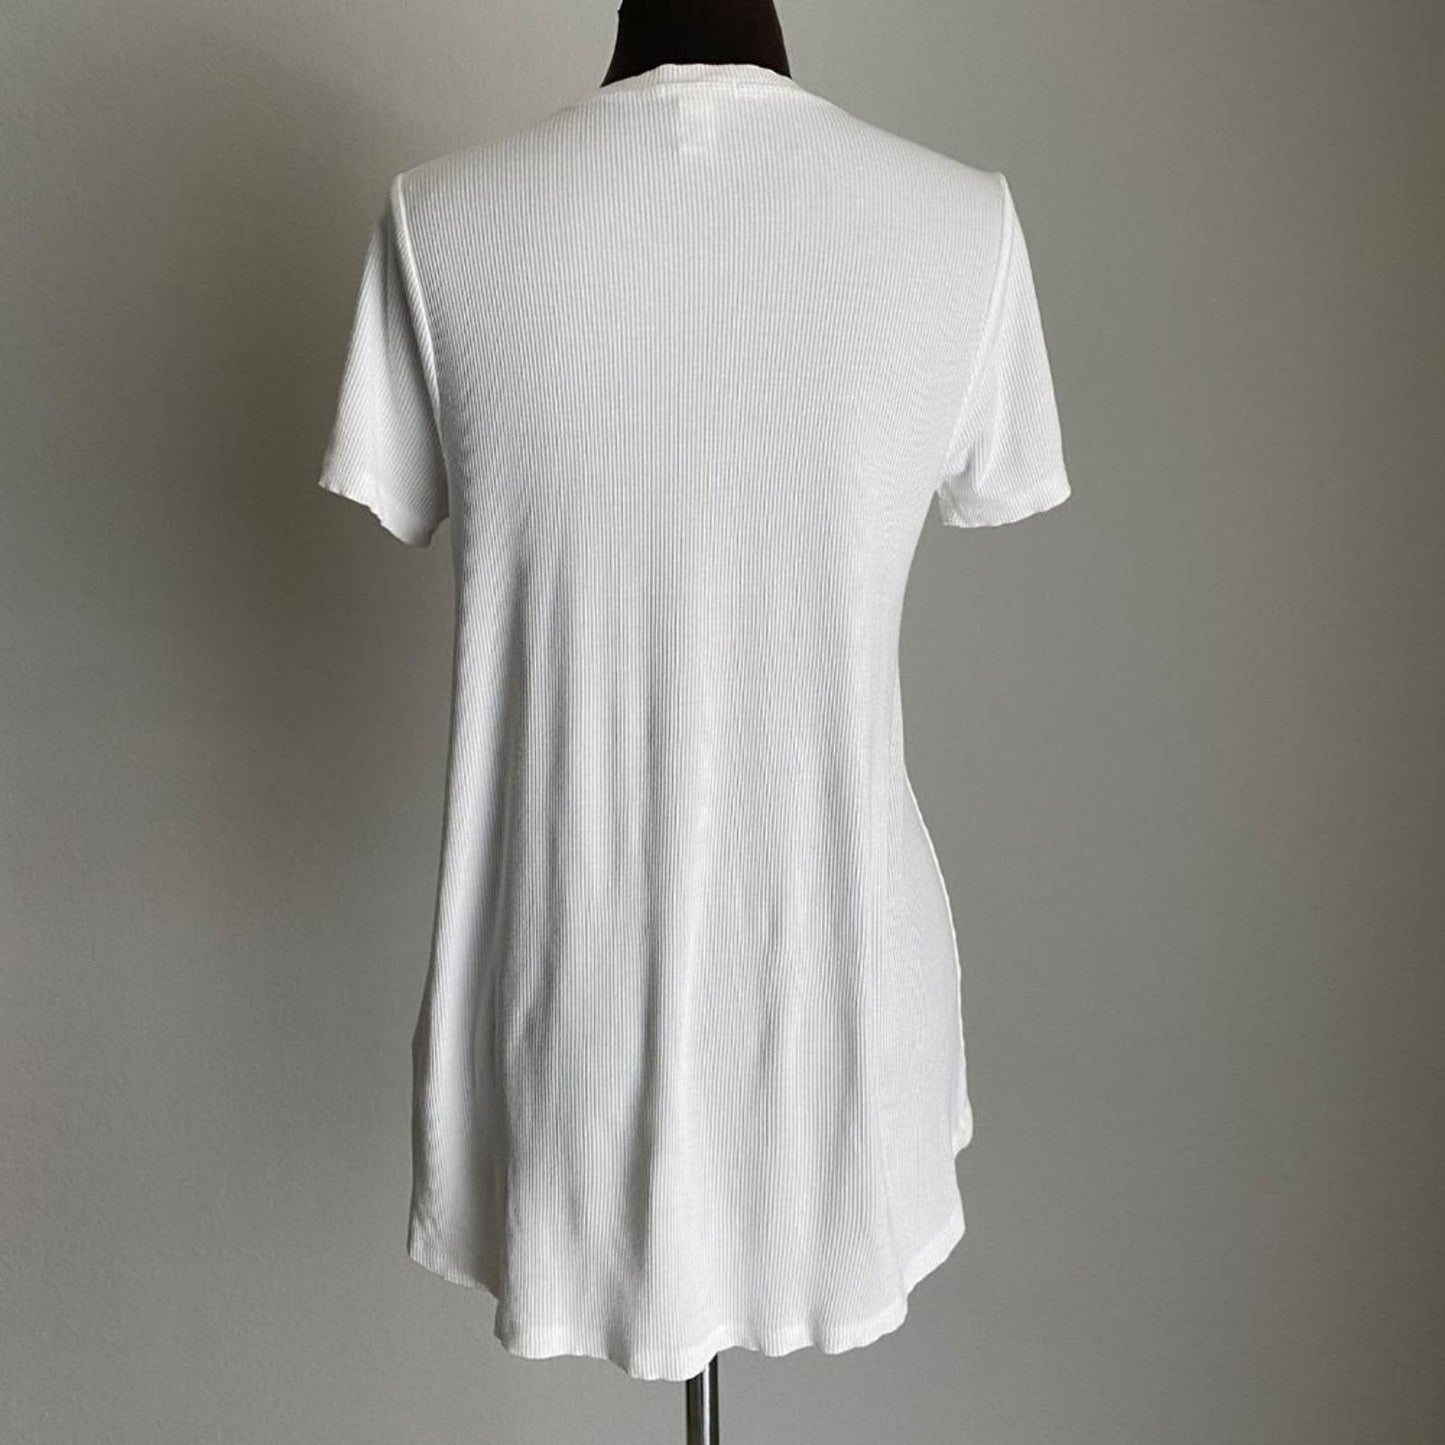 Forever 21 sz S short sleeve white high low top